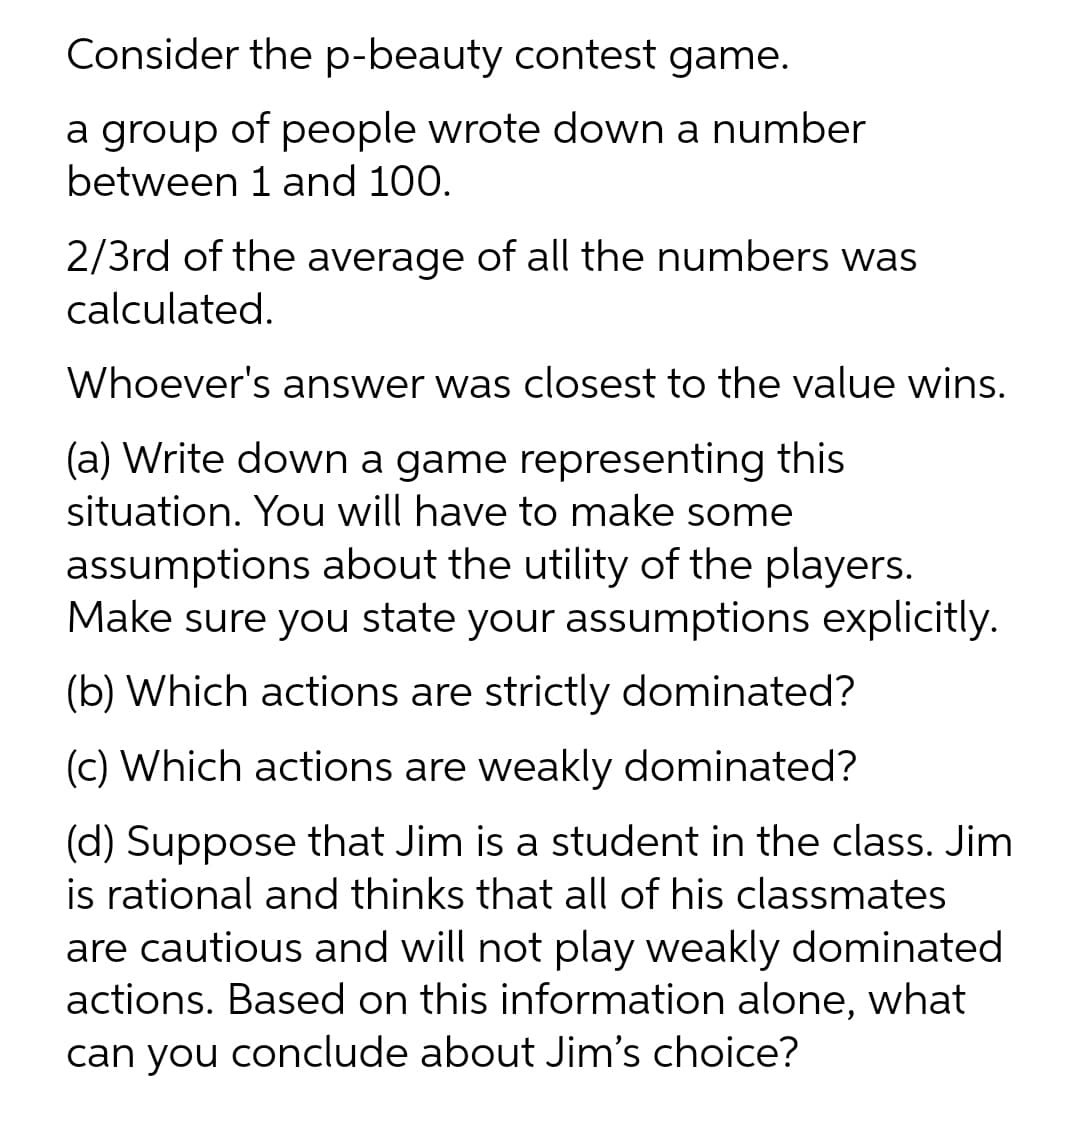 Consider the p-beauty contest game.
a group of people wrote down a number
between 1 and 100.
2/3rd of the average of all the numbers was
calculated.
Whoever's answer was closest to the value wins.
(a) Write down a game representing this
situation. You will have to make some
assumptions about the utility of the players.
Make sure you state your assumptions explicitly.
(b) Which actions are strictly dominated?
(c) Which actions are weakly dominated?
(d) Suppose that Jim is a student in the class. Jim
is rational and thinks that all of his classmates
are cautious and will not play weakly dominated
actions. Based on this information alone, what
can you conclude about Jim's choice?
